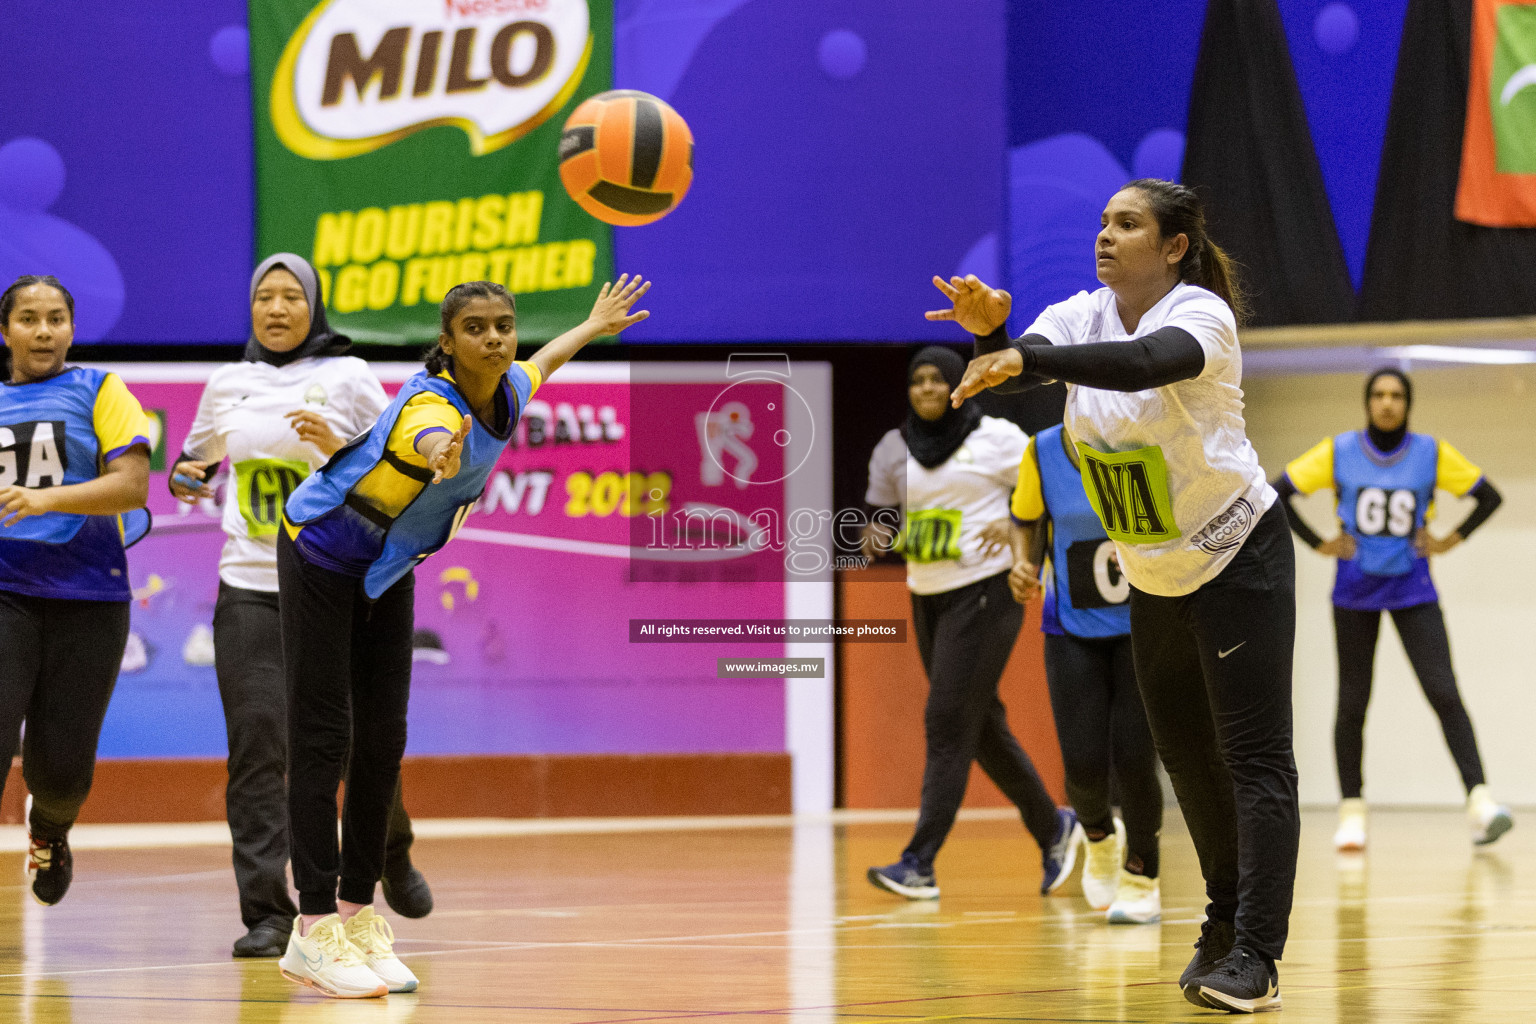 Club Green Streets vs Kulhudhufushi Y&RC in the 1st Division Final of Milo National Netball Tournament 2022 on 22nd July 2022 held in Social Center, Male', Maldives. Photographer: Shuu / images.mv